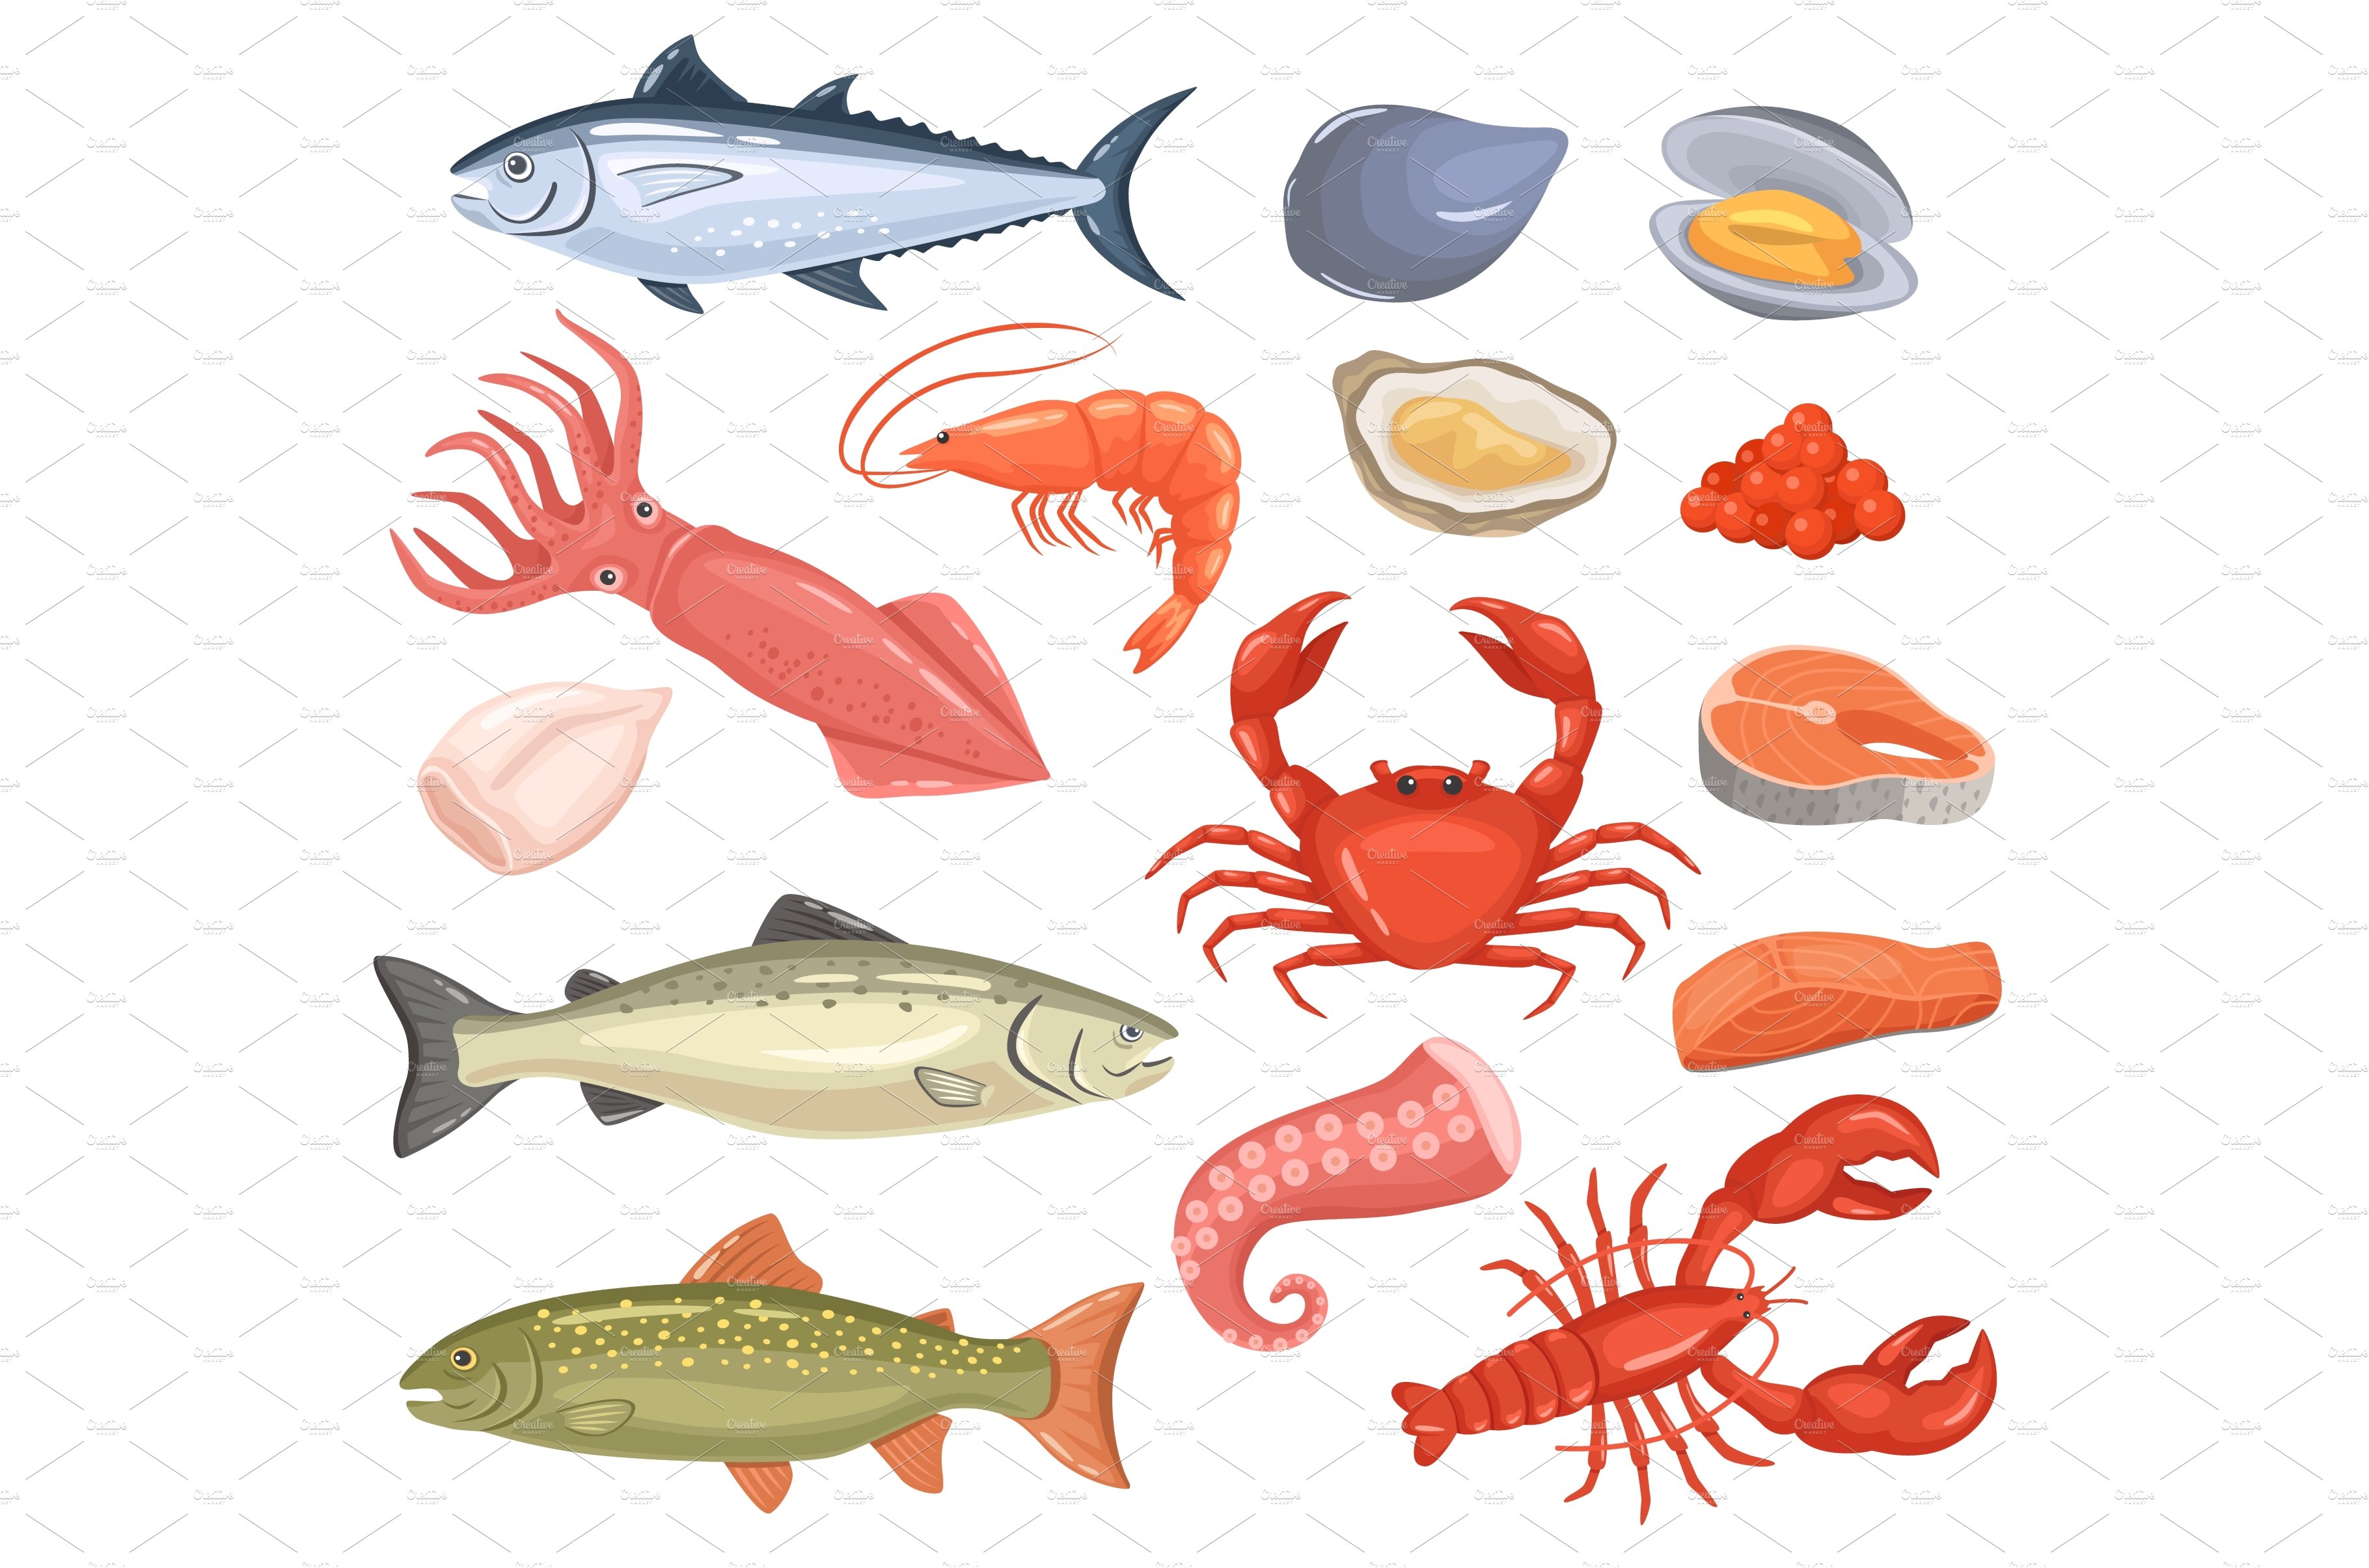 Cartoon seafood. Fresh fish, oyster cover image.